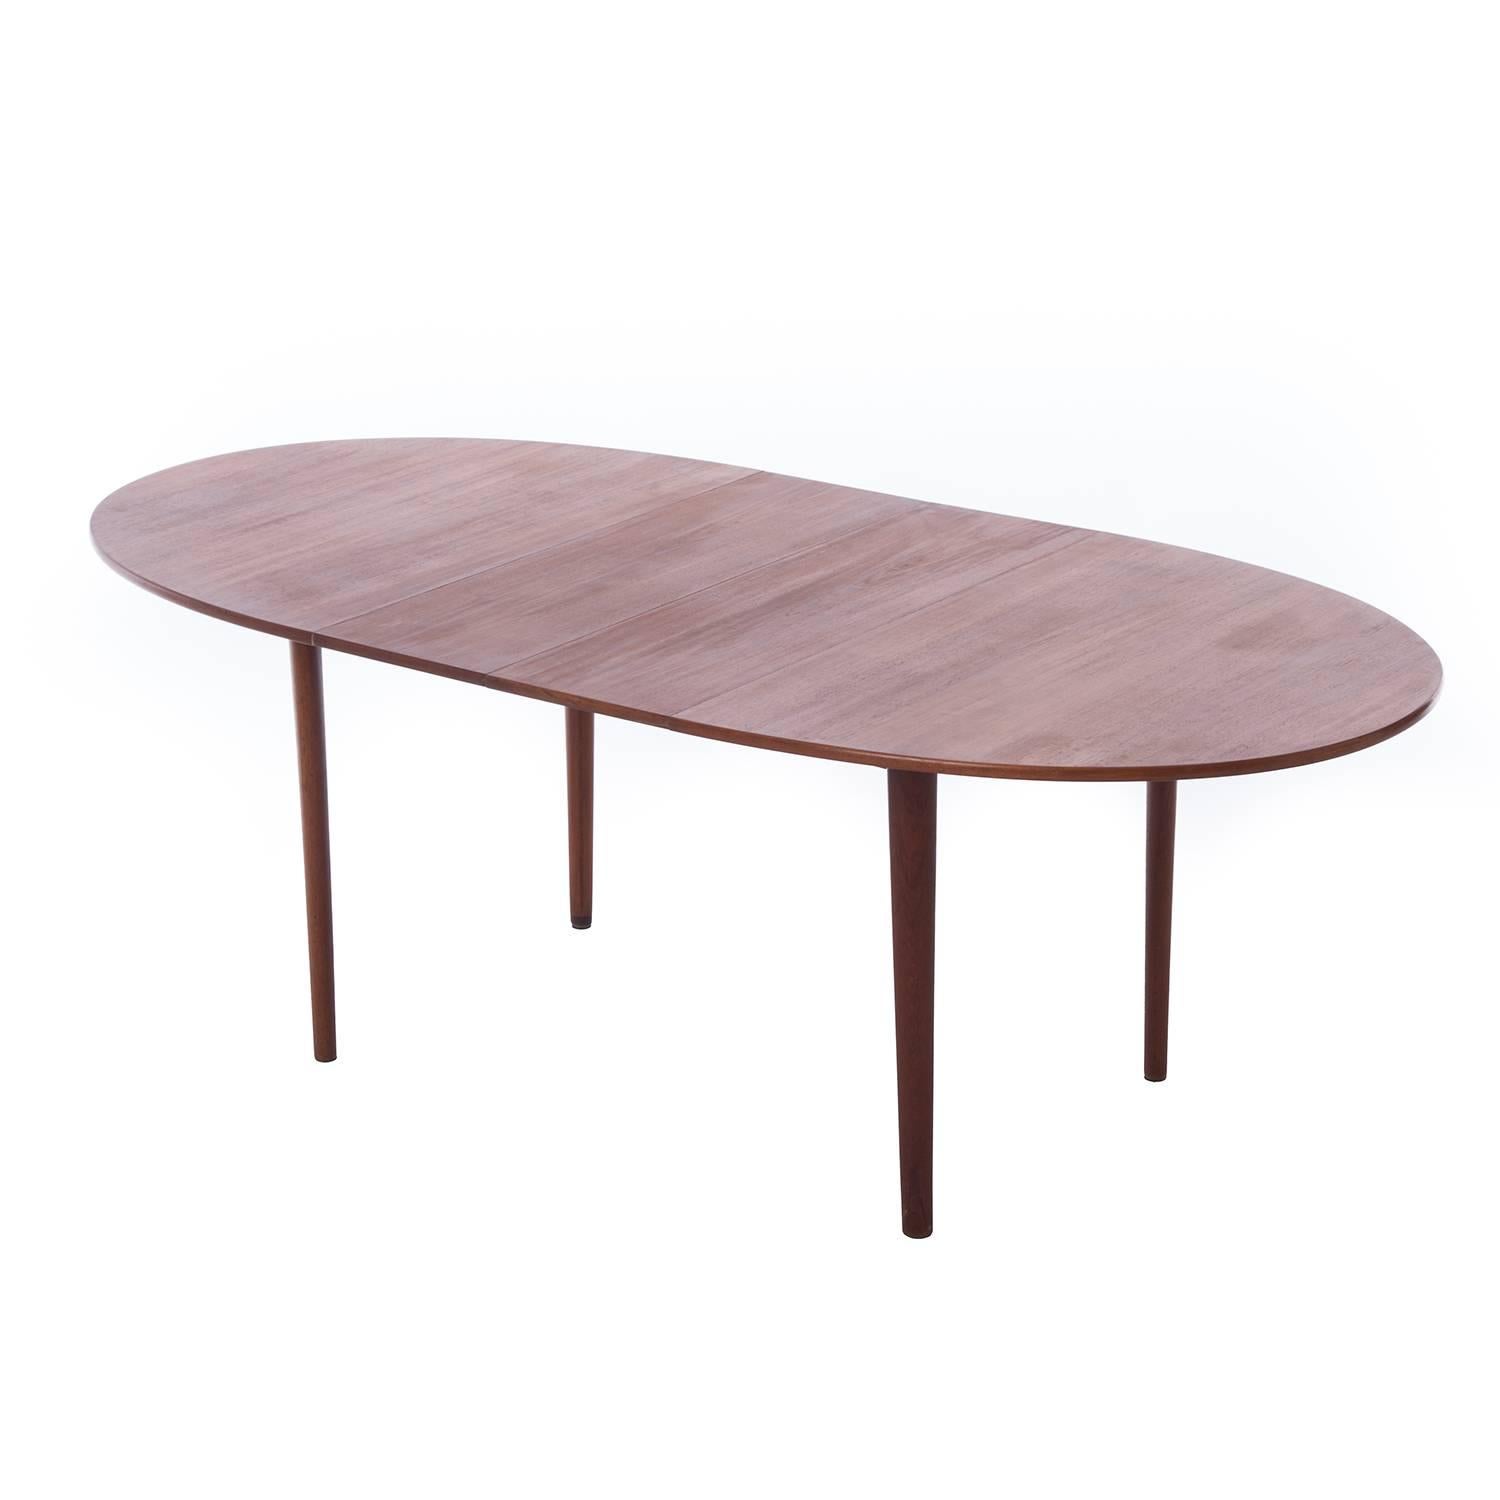 20th Century Danish Modern Oval Ellipse Dining Table with Two Leaves